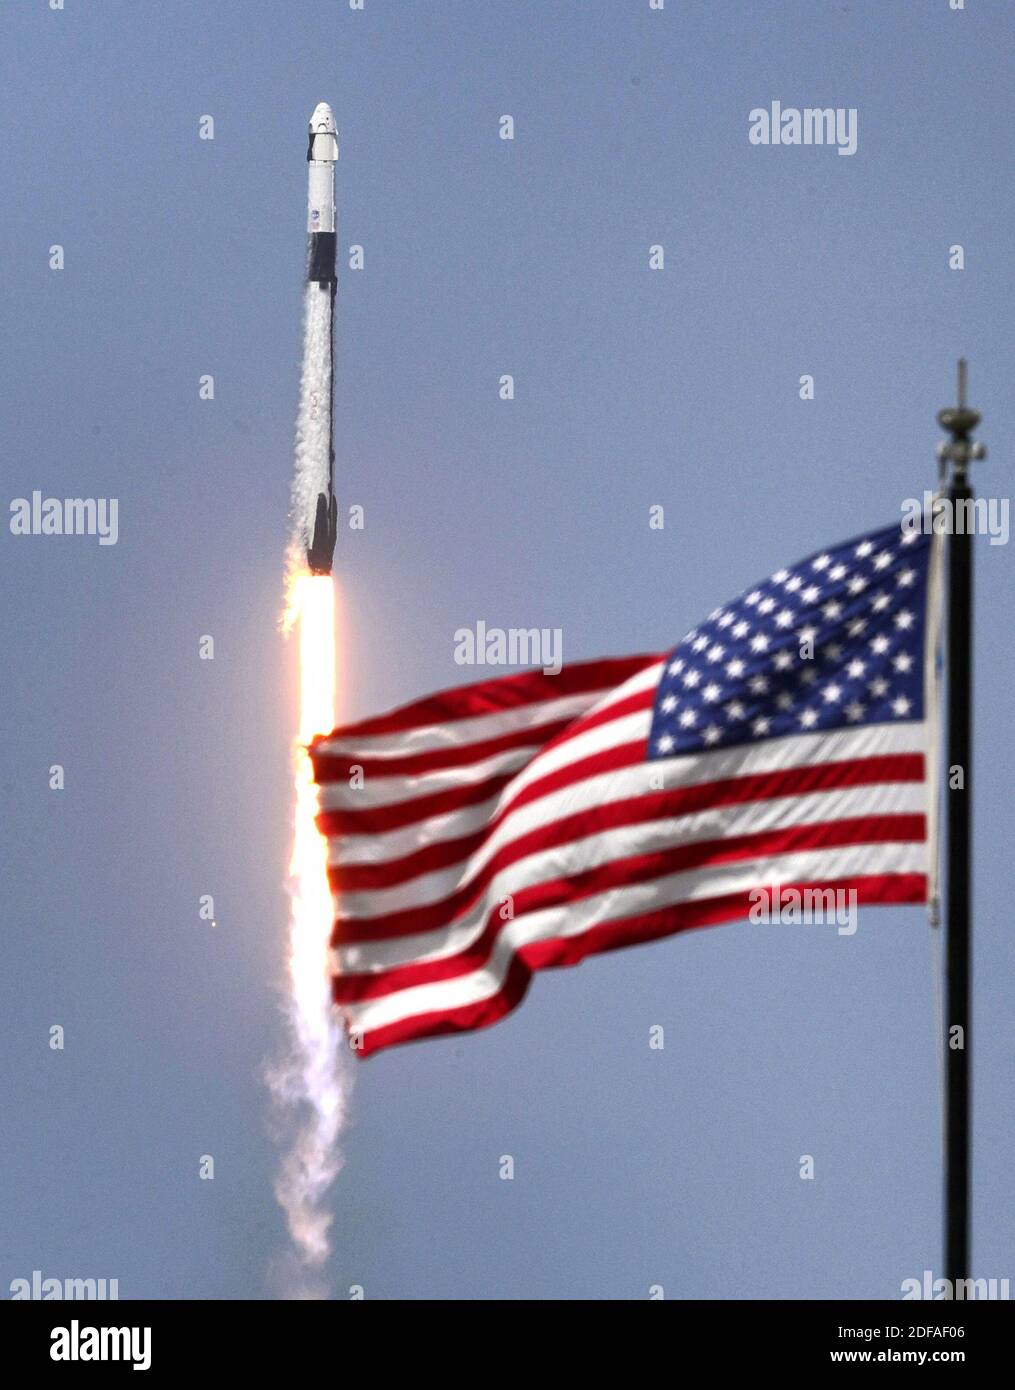 NO FILM, NO VIDEO, NO TV, NO DOCUMENTARY - The SpaceX Falcon 9 rocket, carrying astronauts Doug Hurley and Bob Behnken in the Crew Dragon capsule, lifts off from Kennedy Space Center, FL, USA, on Saturday, May 30, 2020. The SpaceX Demo-2 mission is the first crewed launch of an orbital spaceflight from the U.S. in nearly a decade. Photo by Joe Burbank/Orlando Sentinel/TNS/ABACAPRESS.COM Stock Photo